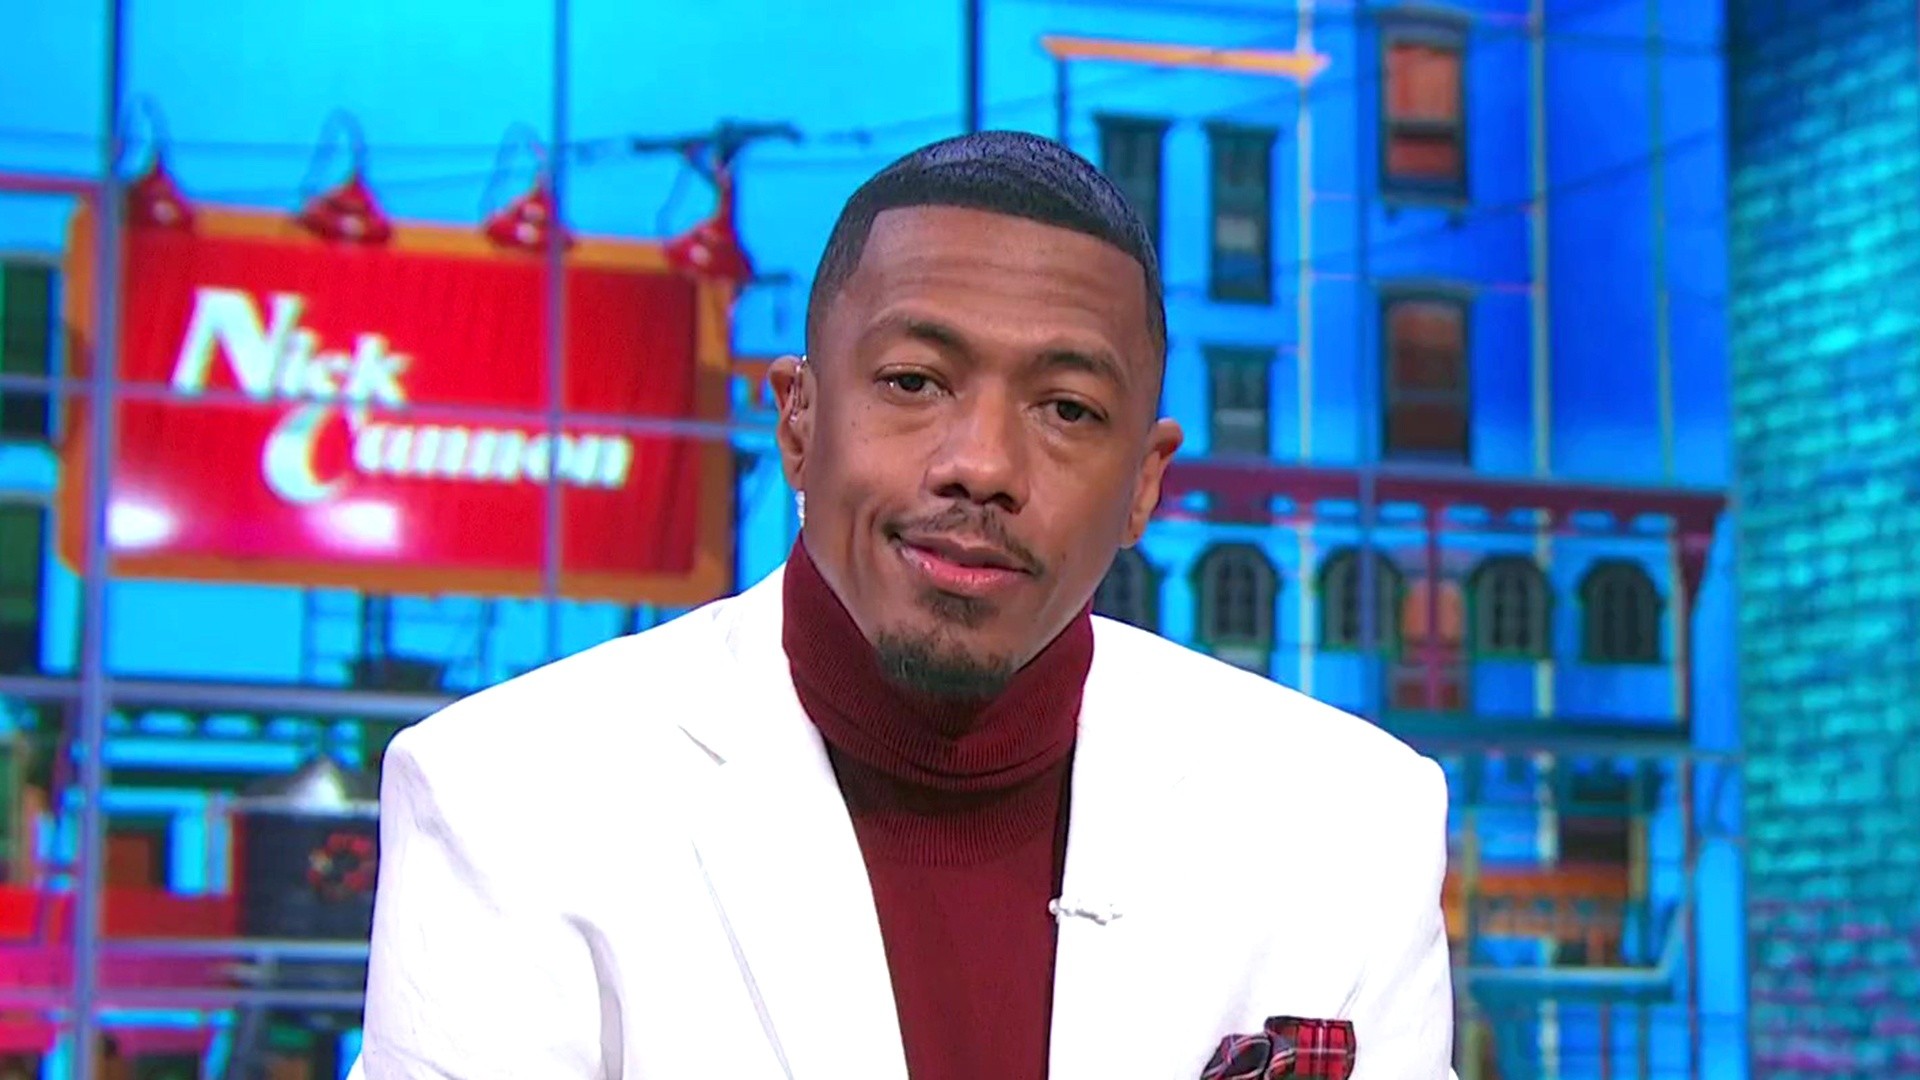 Nick Cannon Just Insured This Part Of His Body For $10 Million After Fathering 12 Kids